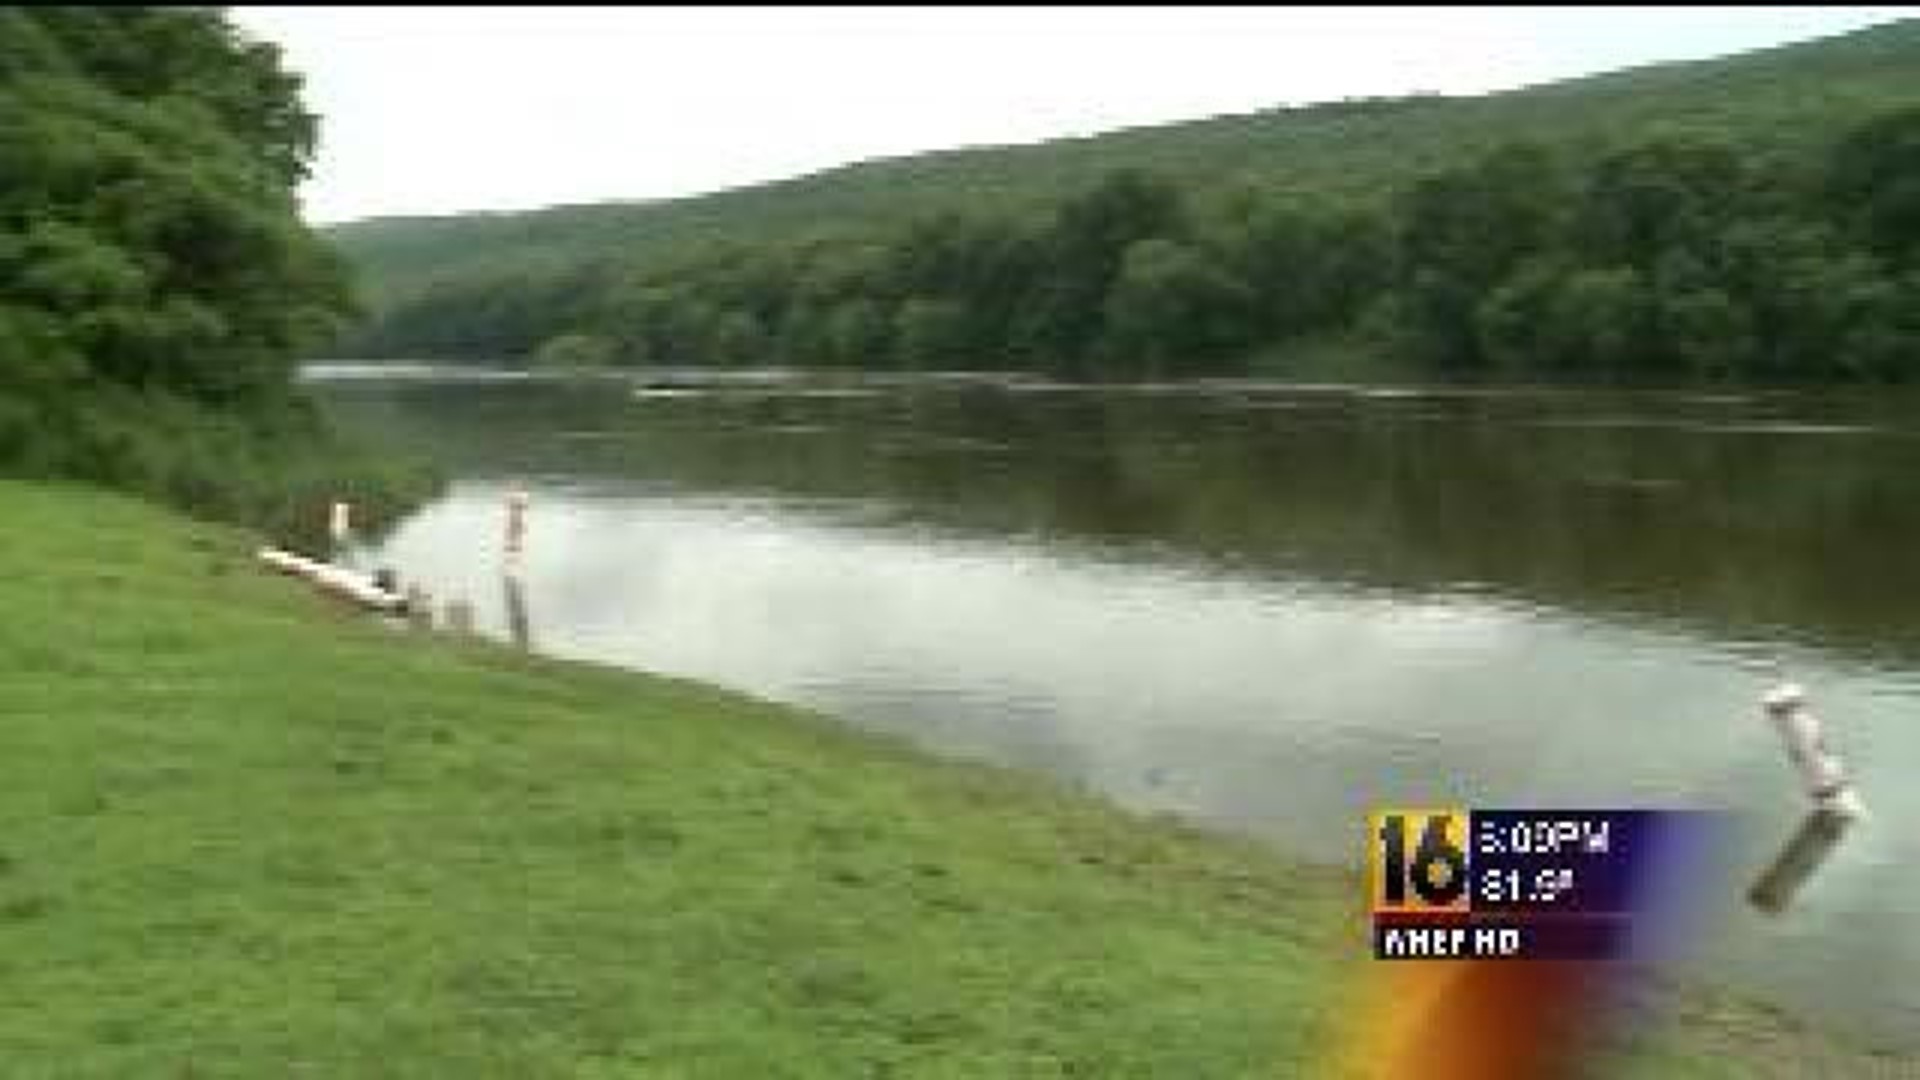 DE River Safety Top Priority During Holiday